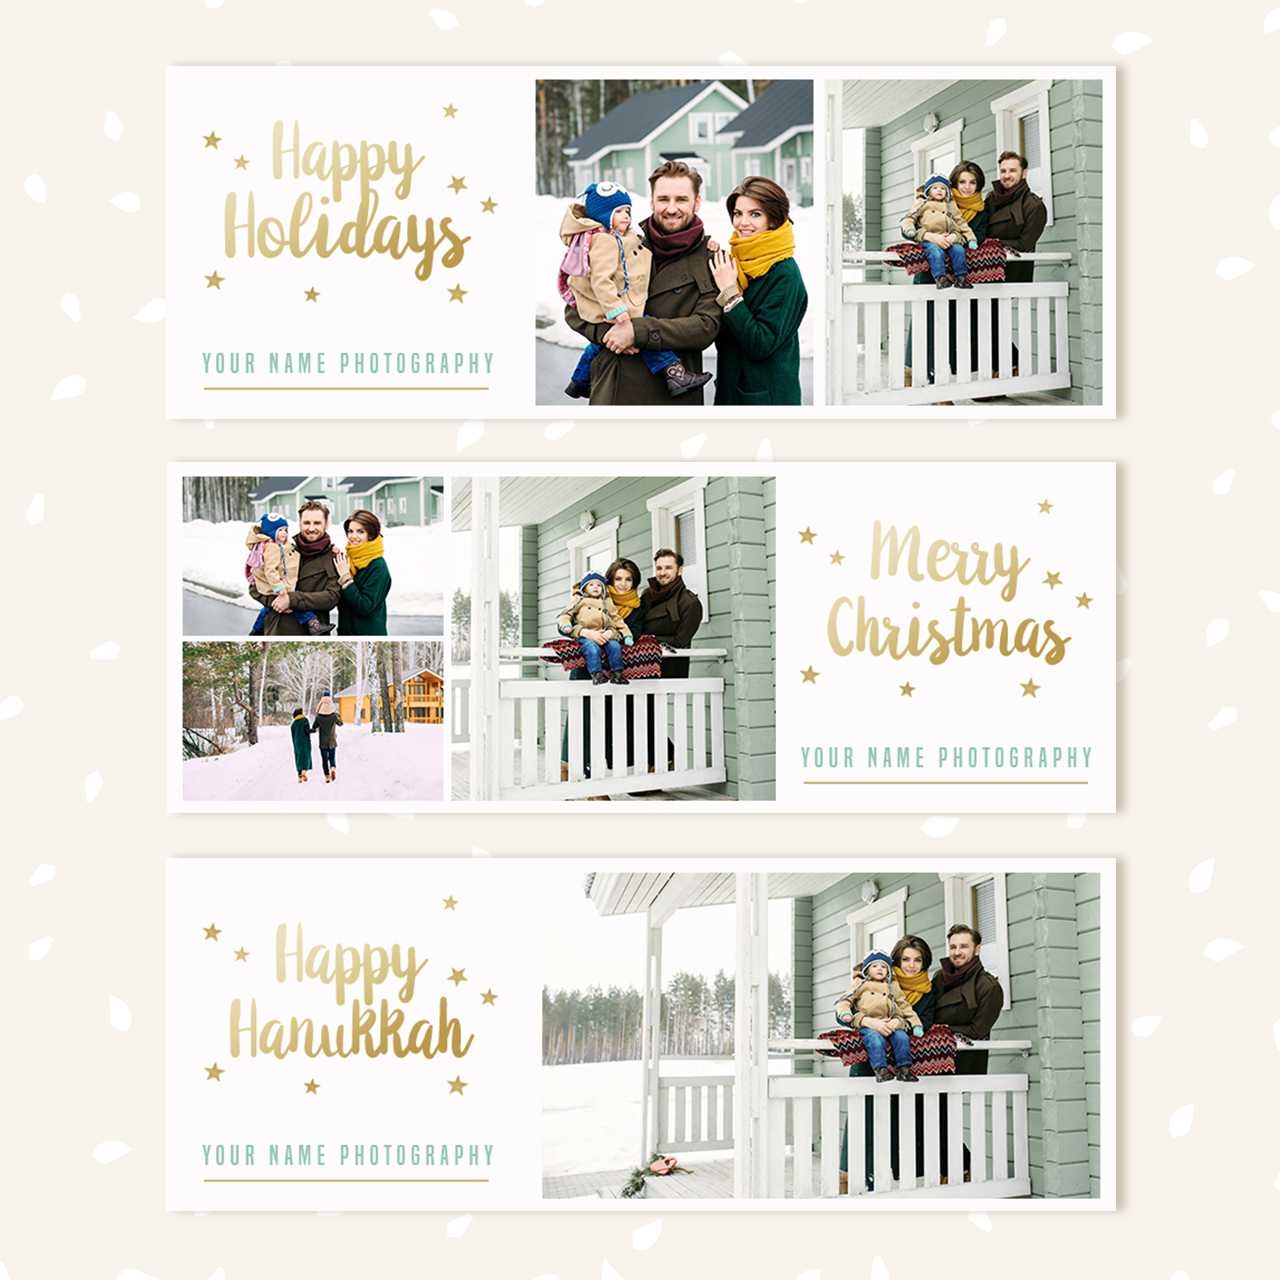 Christmas photography Facebook covers